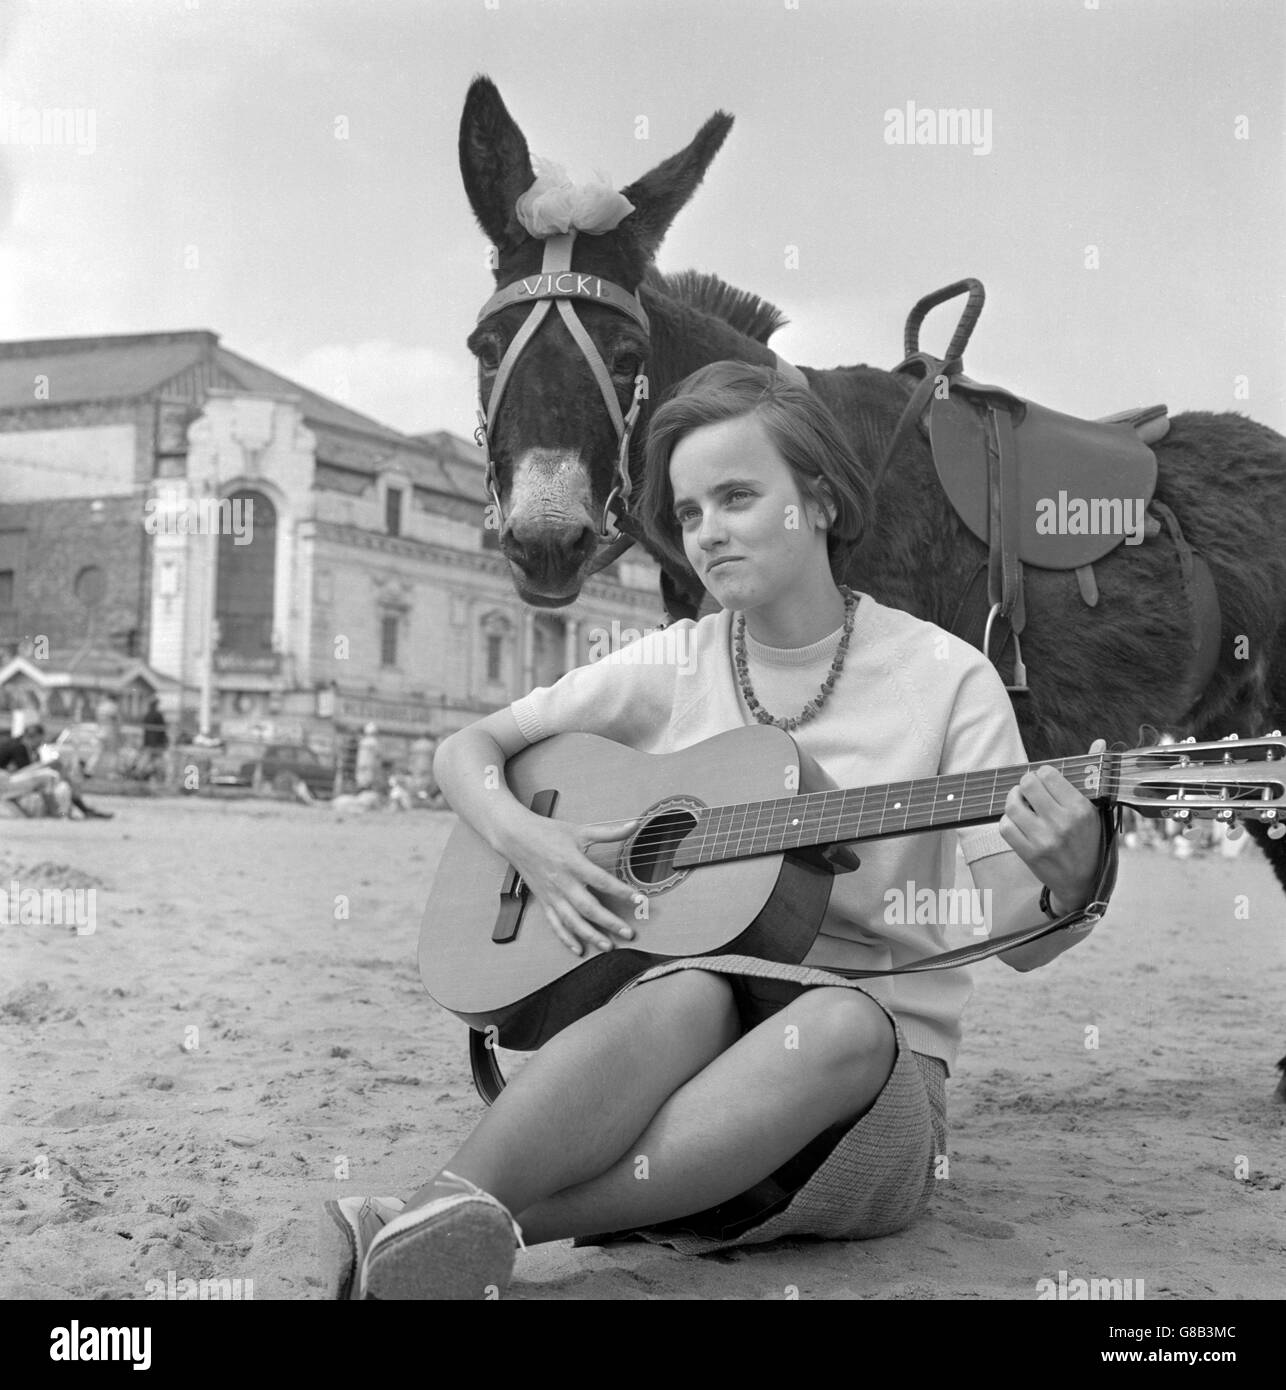 Vicki the donkey is charmed by the music made by German student Heidi Heeren on the beach at Scarborough, Yorkshire. Heidi, who is studying in Hull, is a popular folk singer at Yorkshire folk clubs. Stock Photo